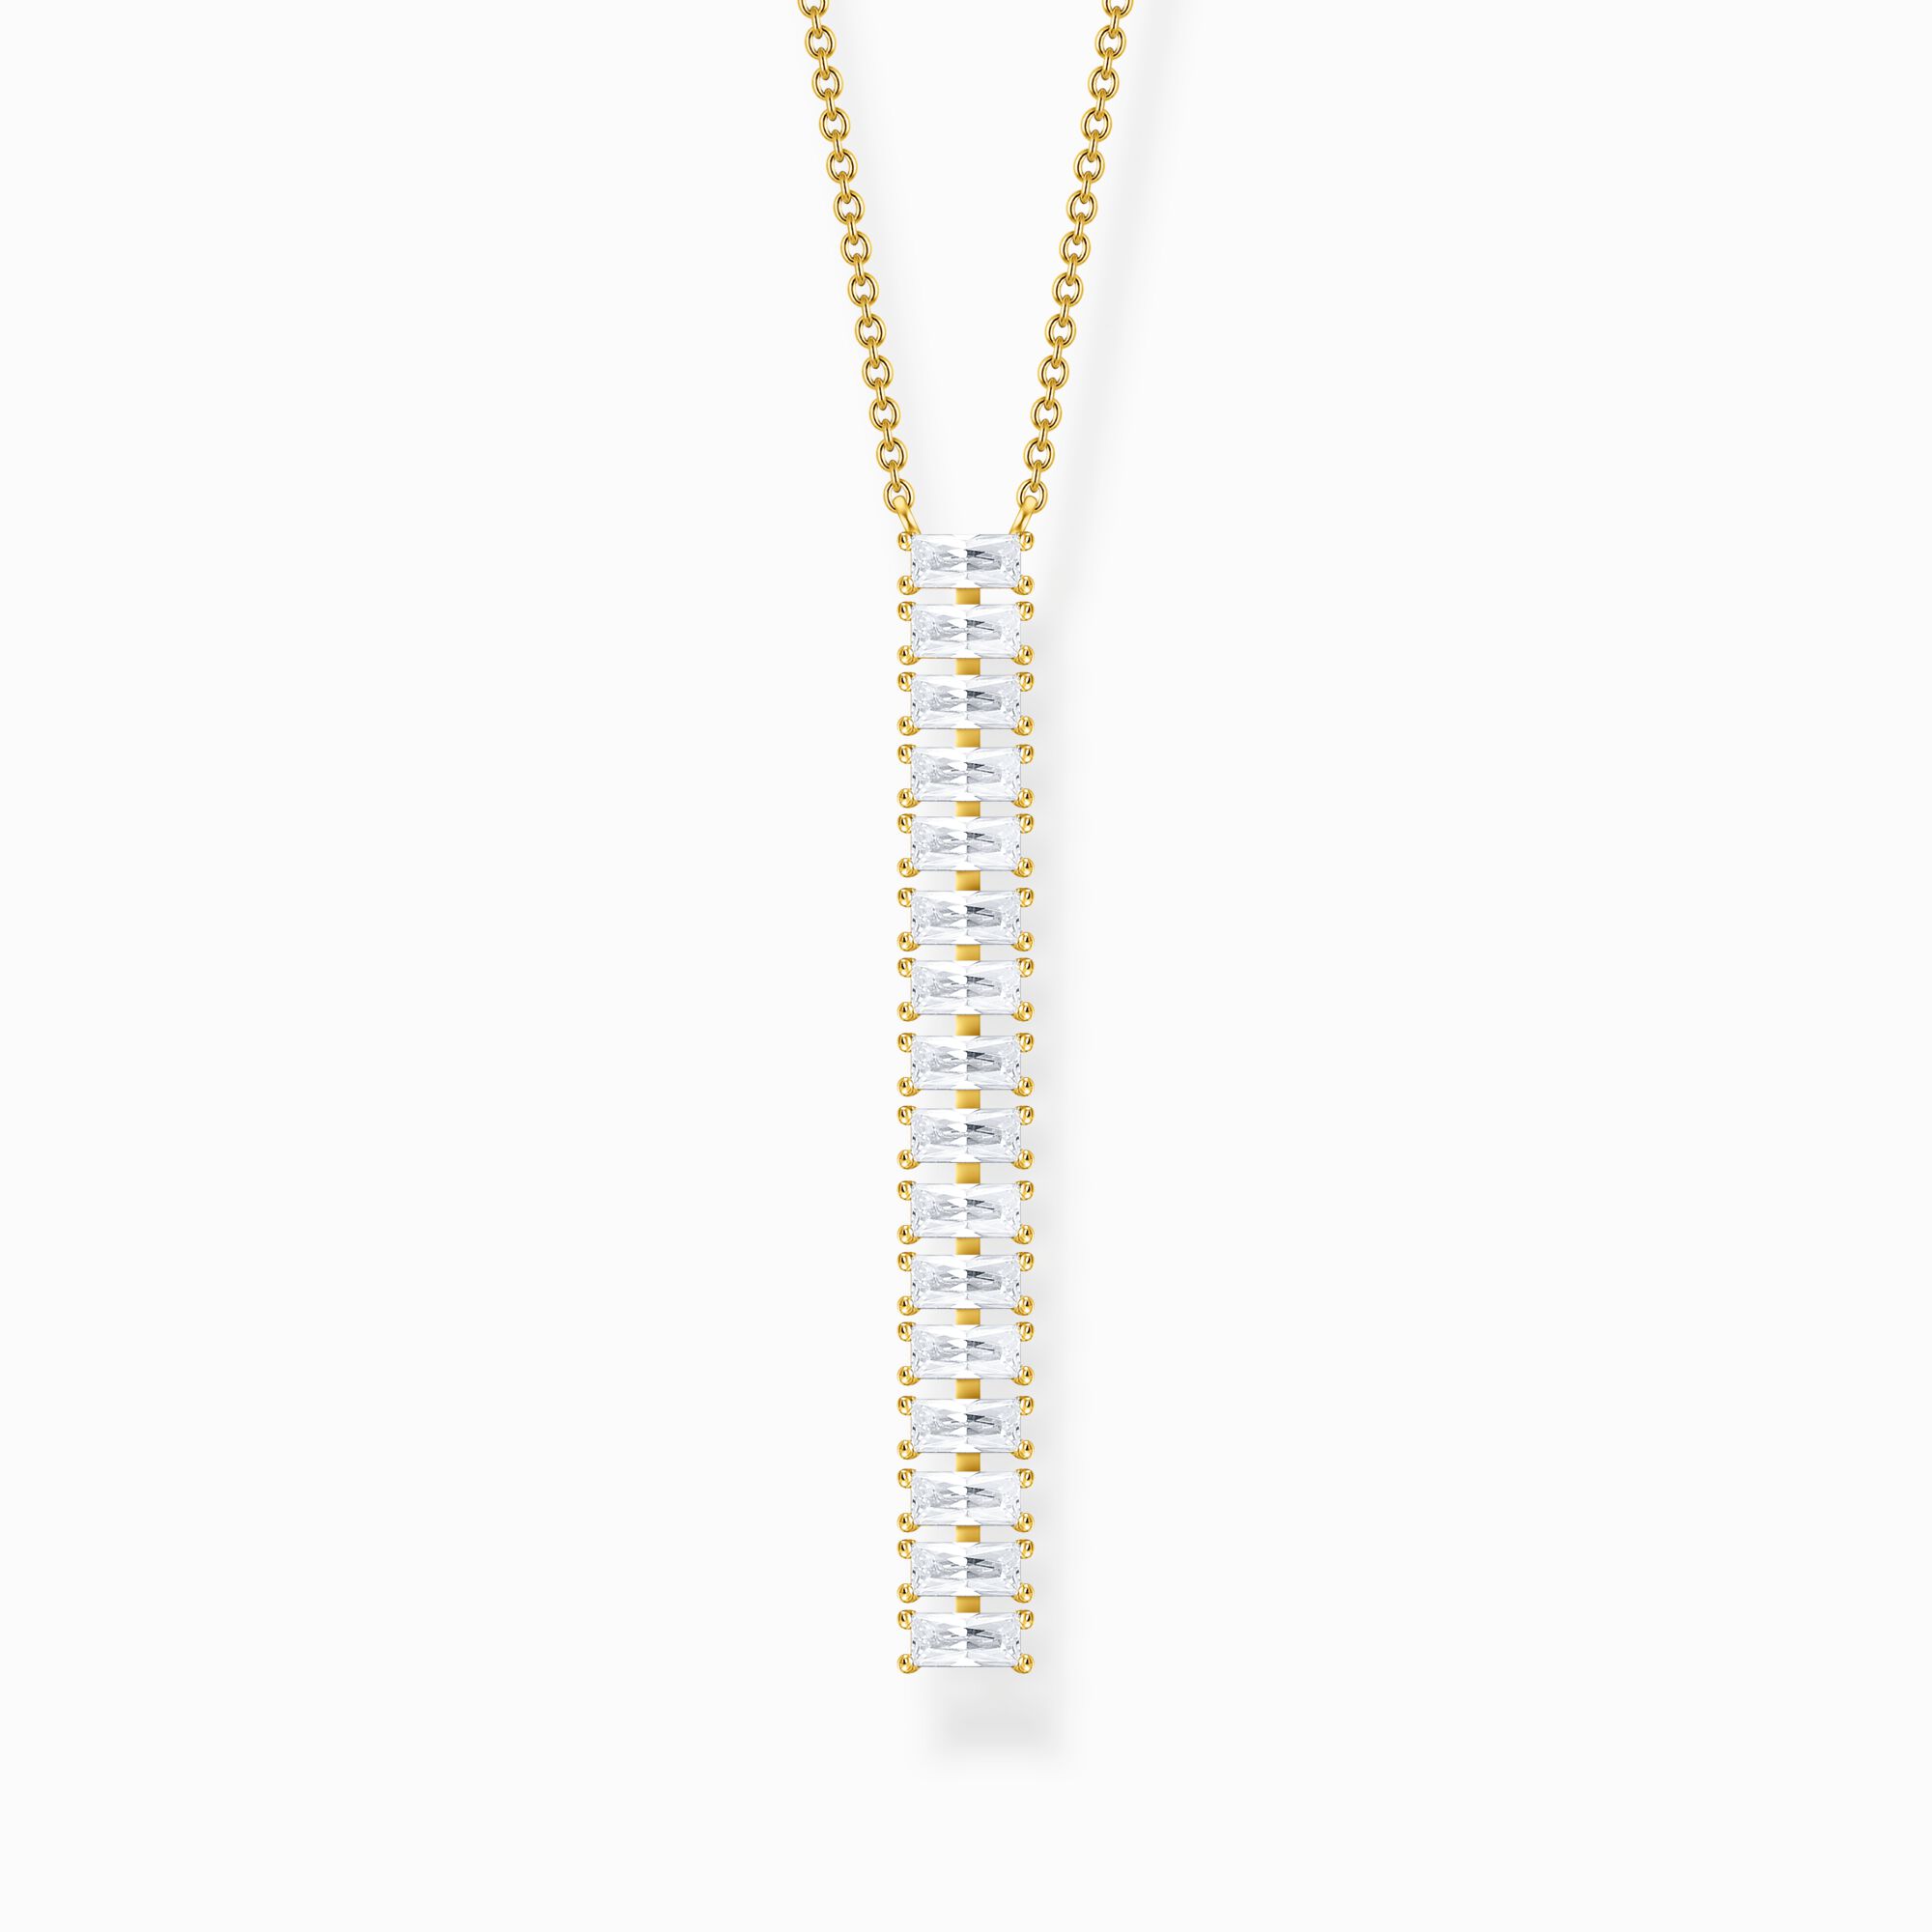 Necklace white stones gold from the  collection in the THOMAS SABO online store